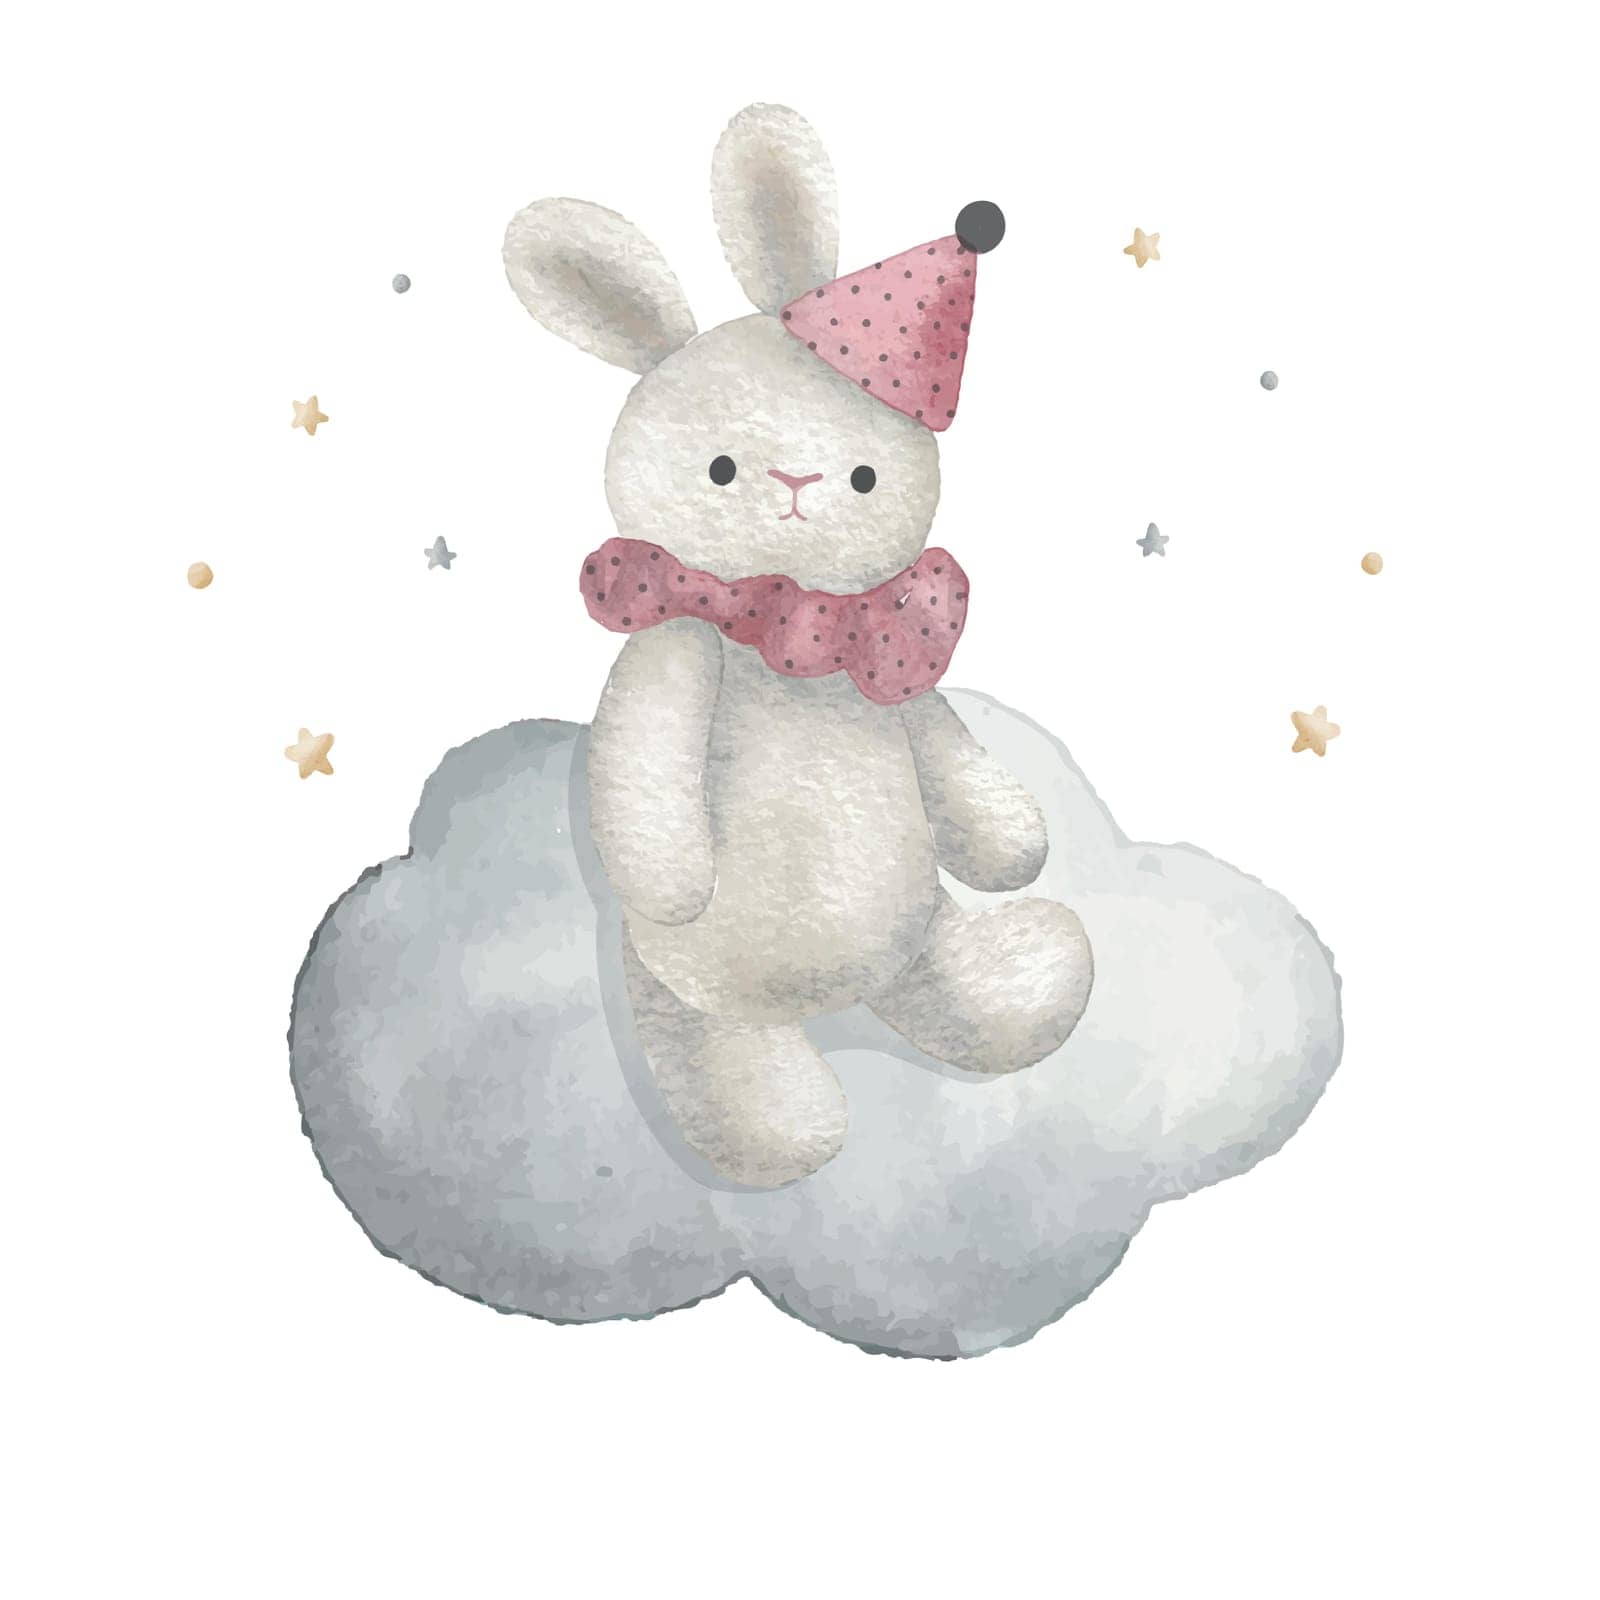 Cute bunny on the cloud with little stars, watercolor vector illustration. by ku4erashka